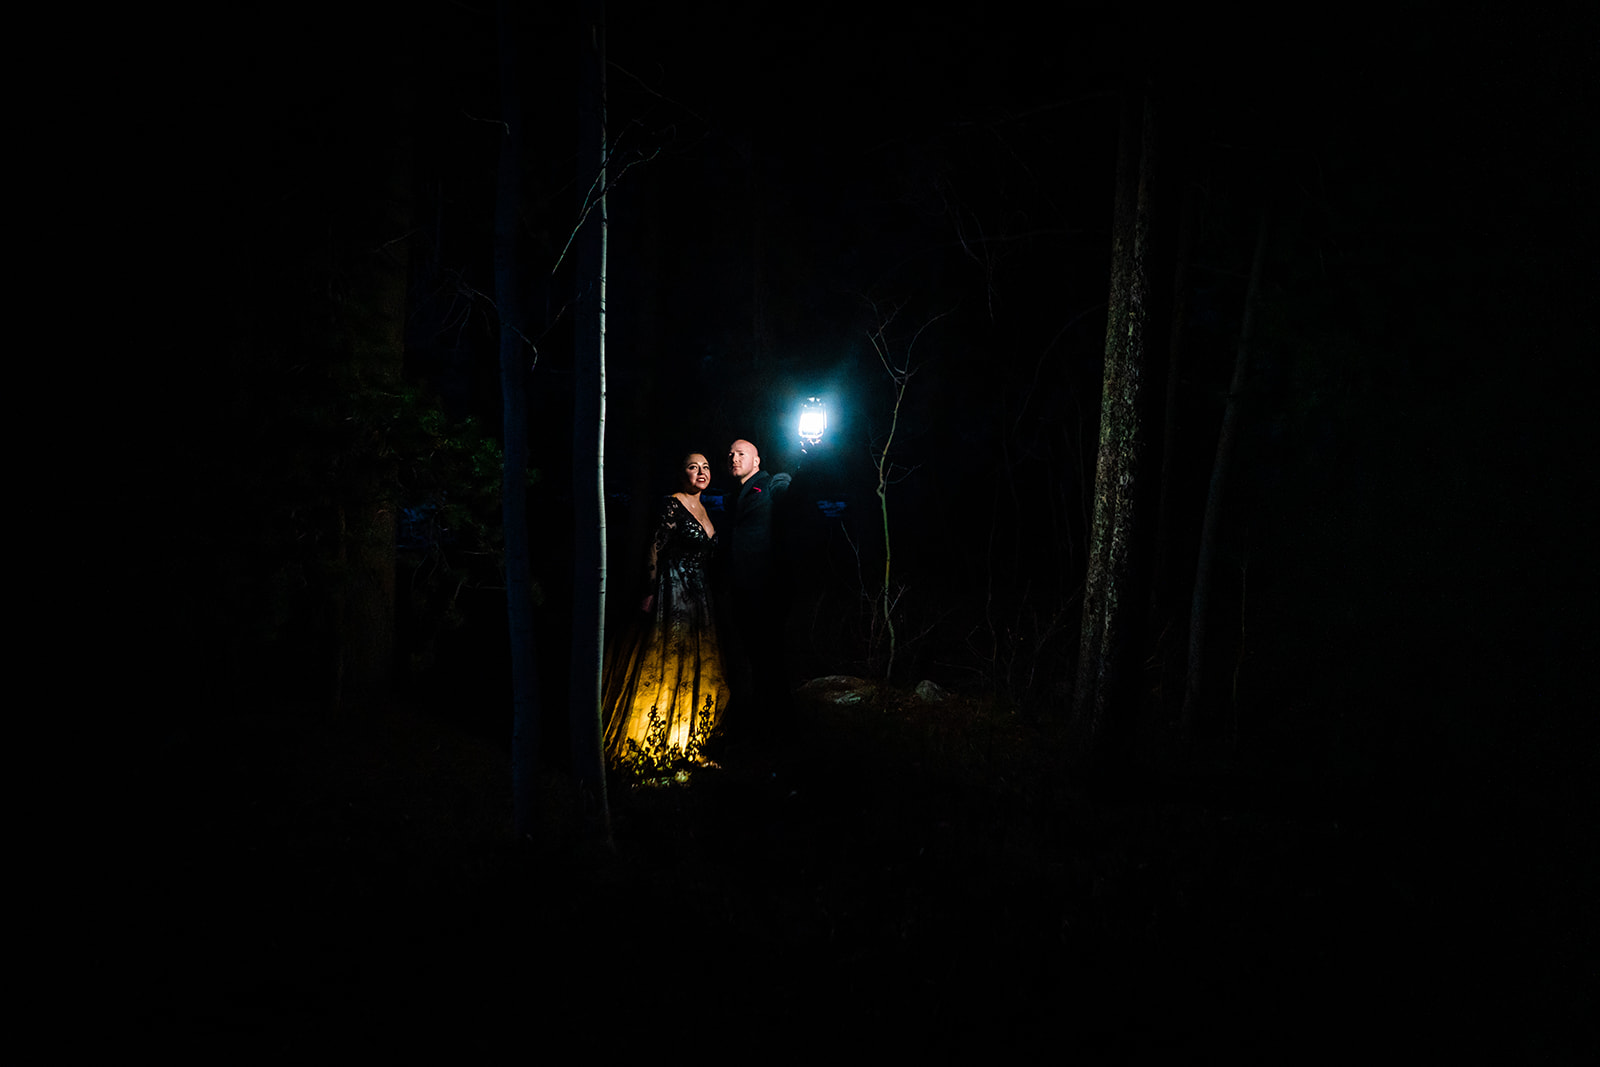 Halloween elopement with a black wedding dress in the woods